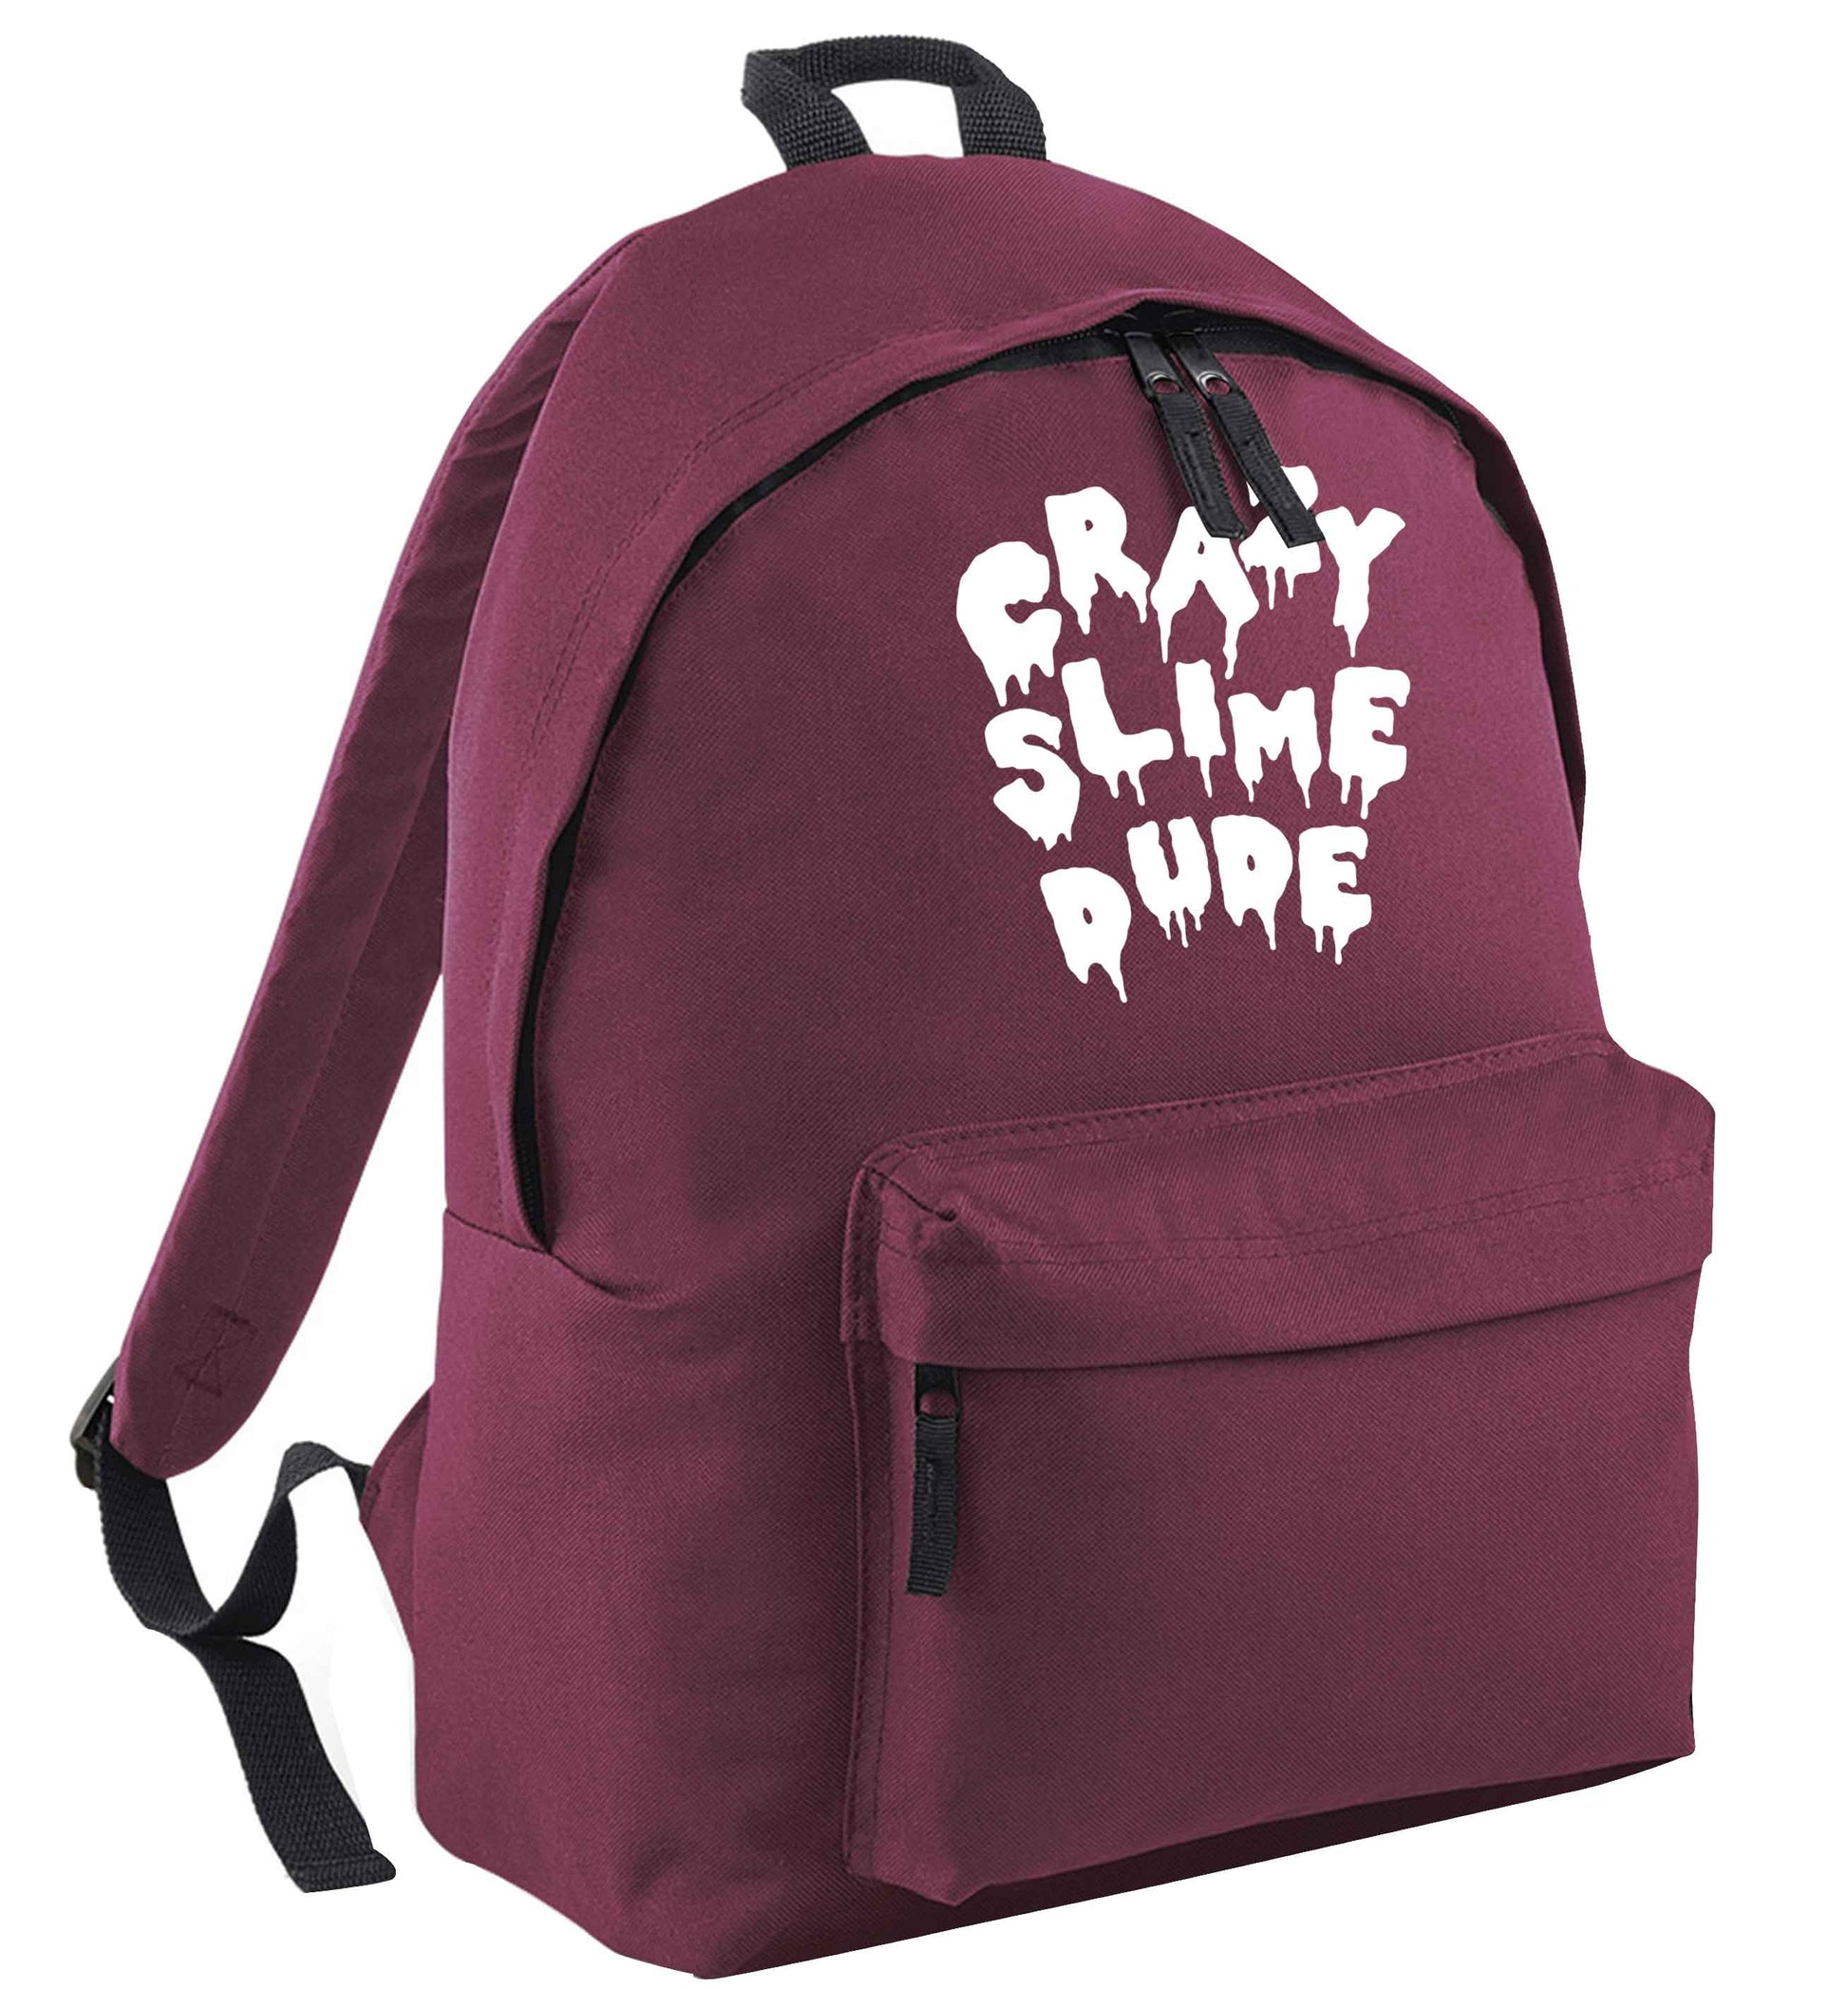 Crazy slime dude maroon adults backpack